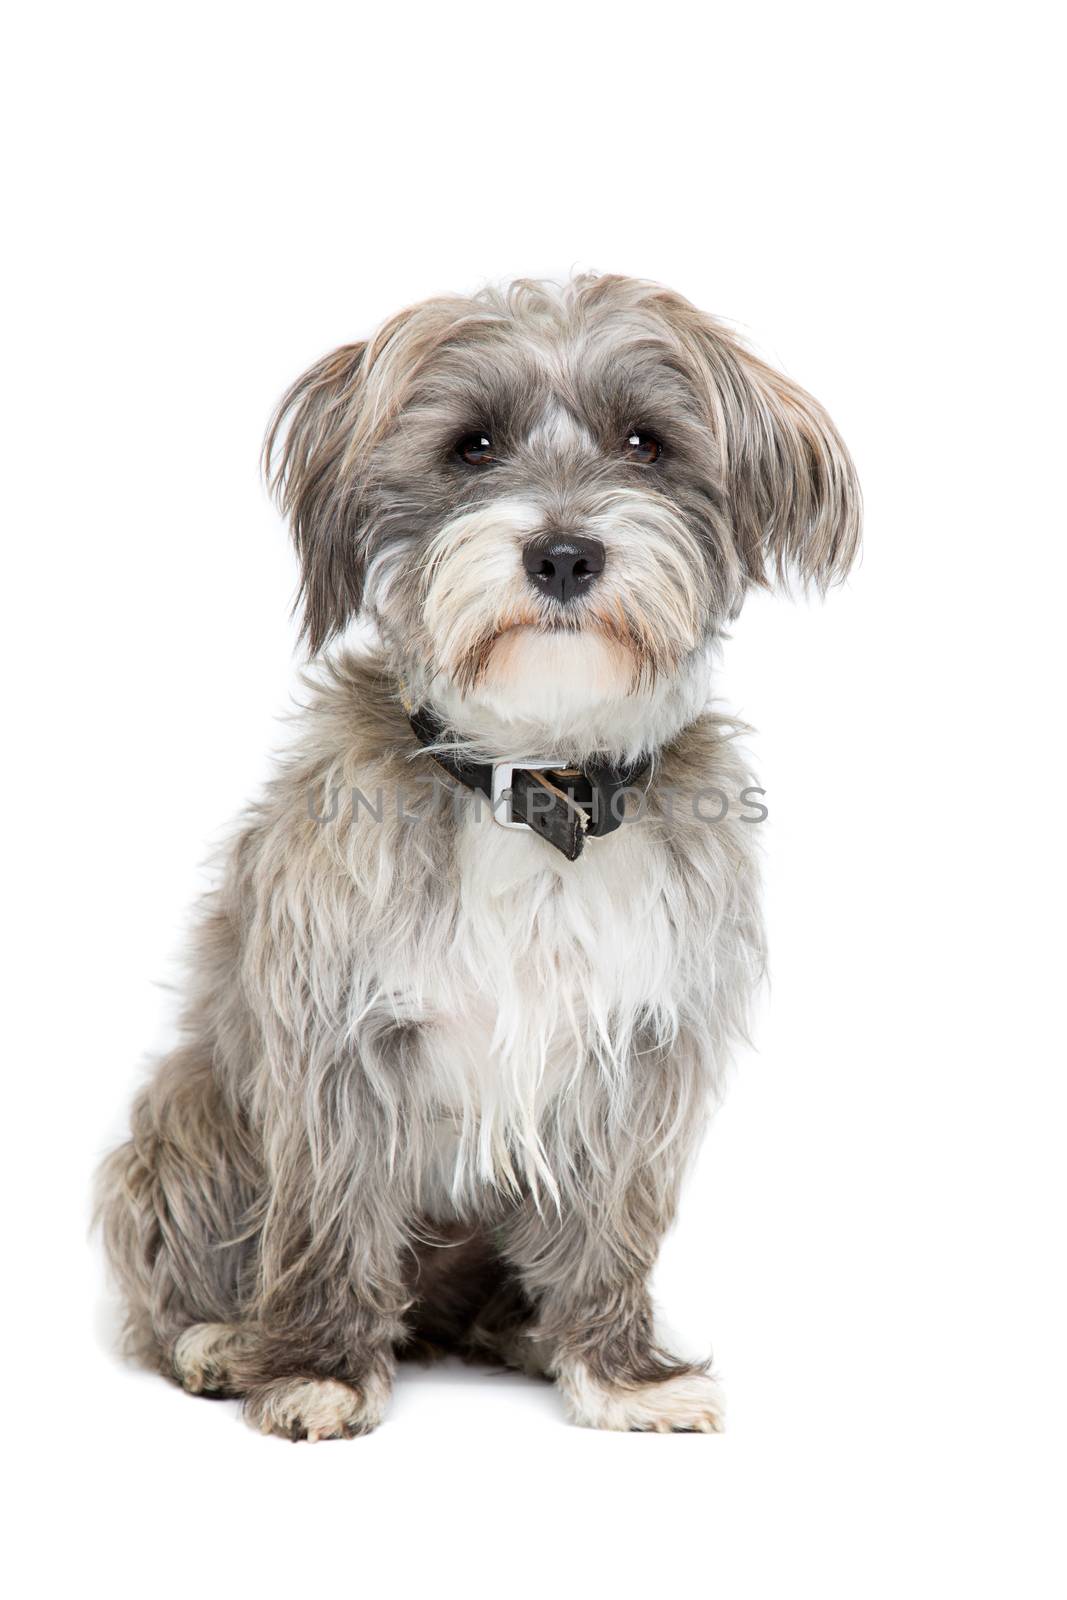 grey and white mixed breed dog in front of a white background